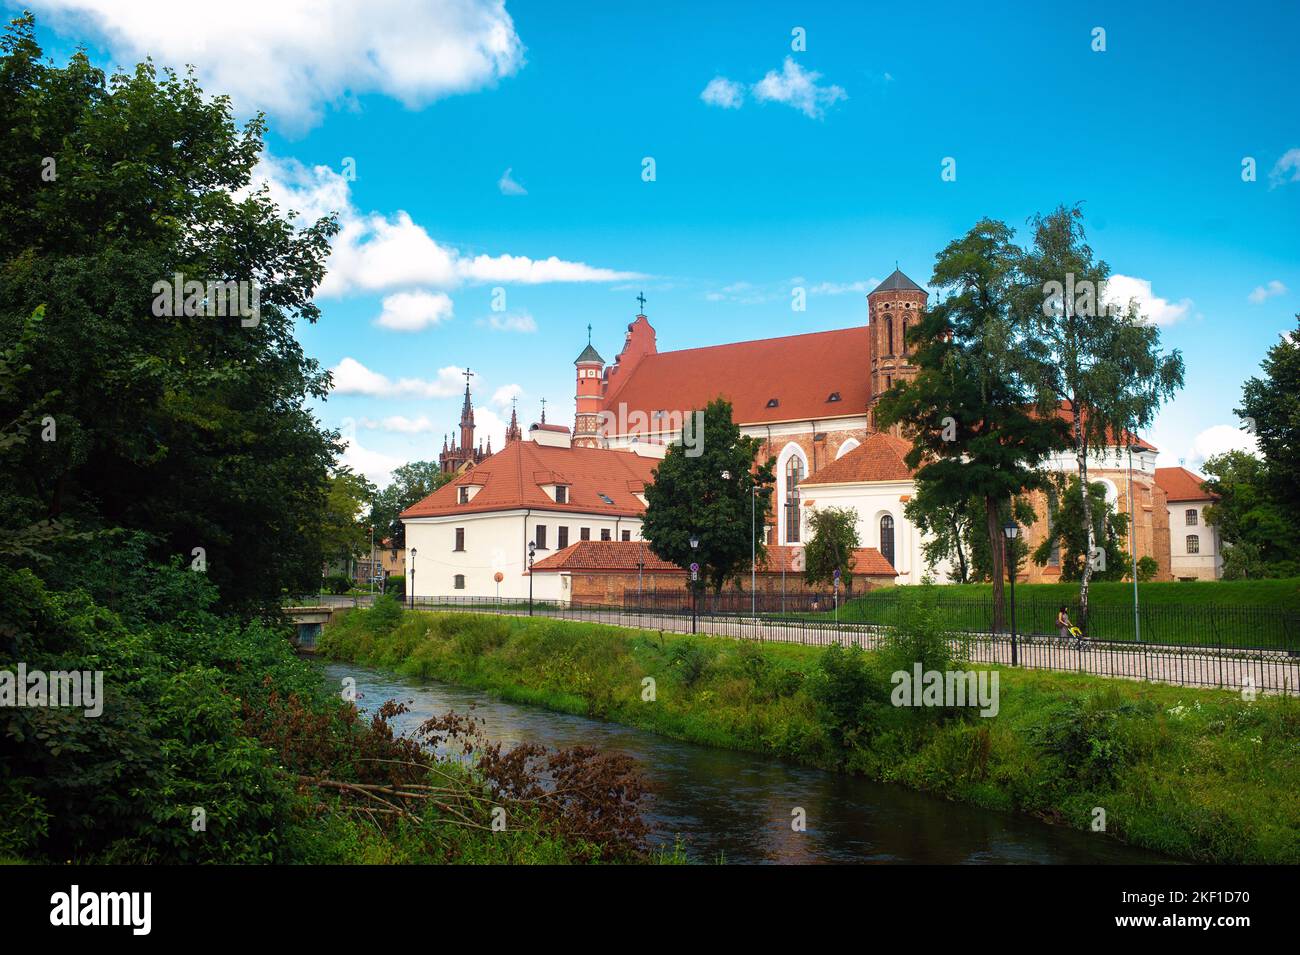 View across the river To The Roman Catholic Church Of St. Anne And The Church Of St. Francis And St. Bernard In The Old Town On A Summer Sunny Day Stock Photo